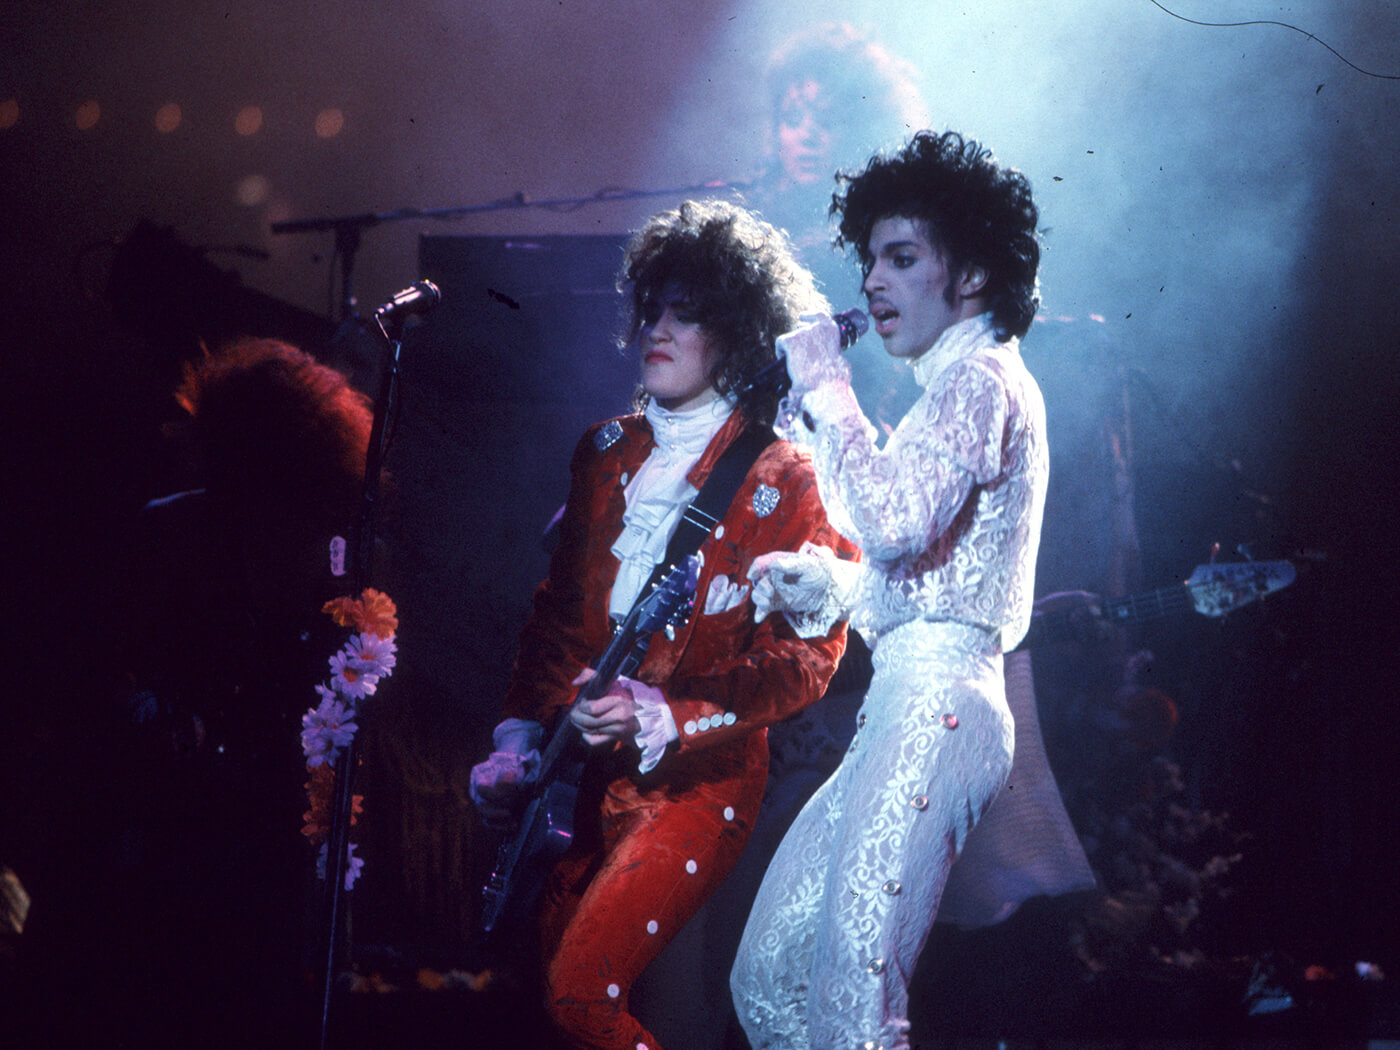 Prince and Wendy Melvoin